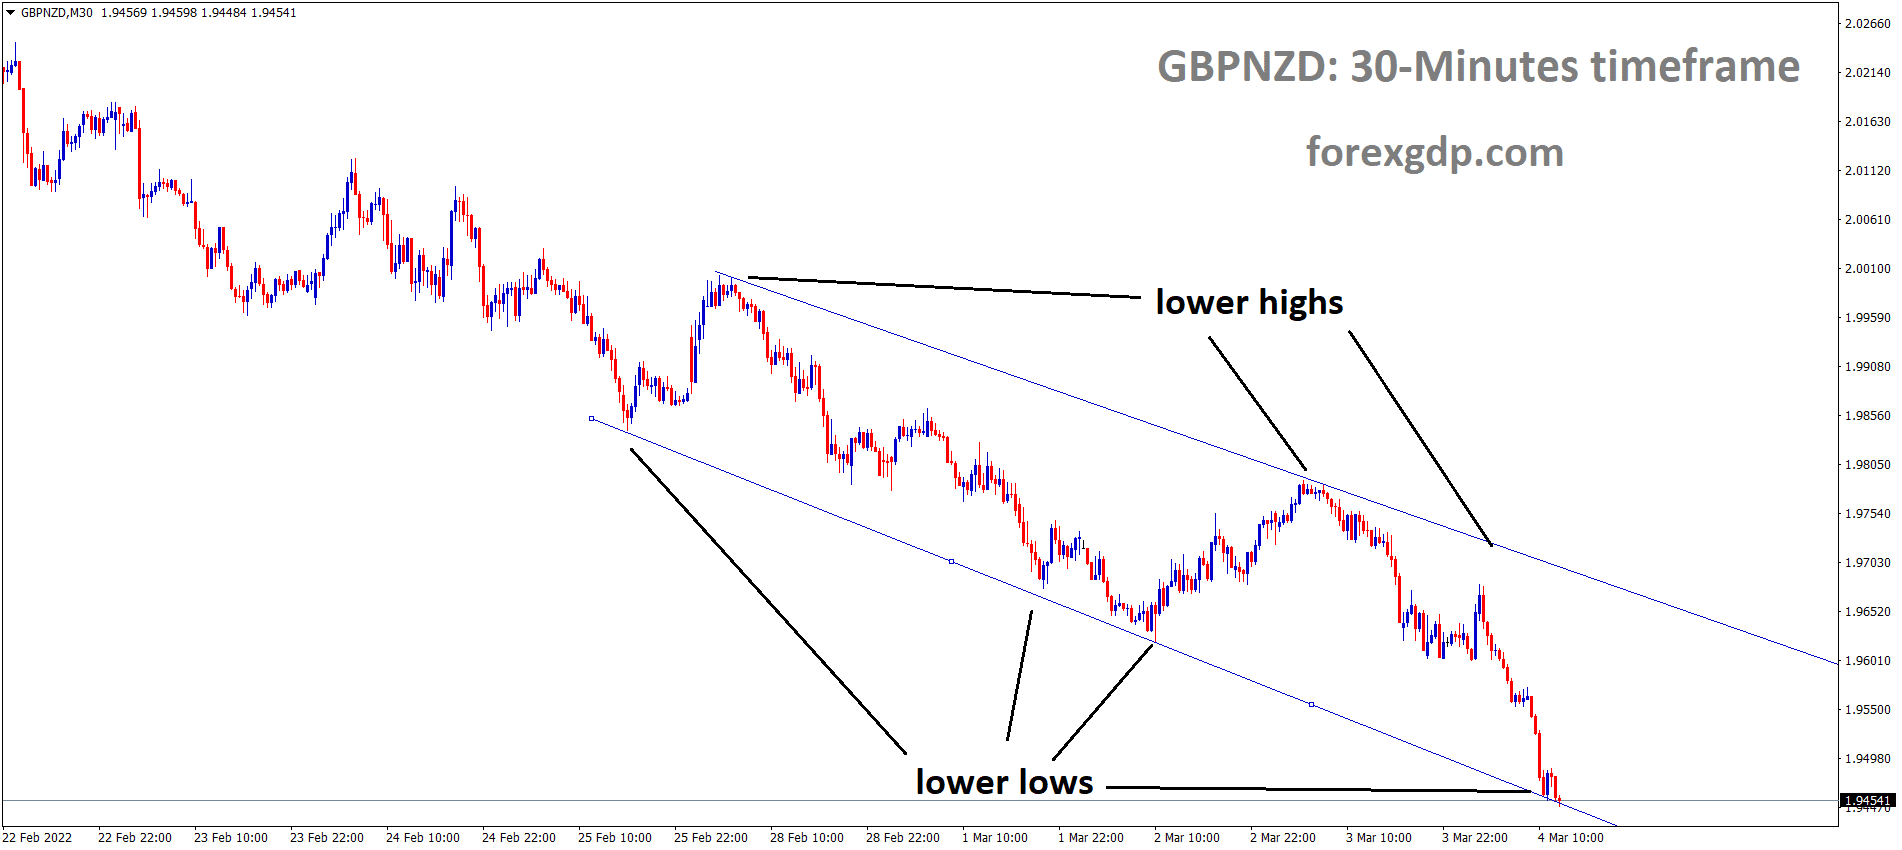 GBPNZD is moving in the Descending channel and the market has reached the lower low area of the channel.